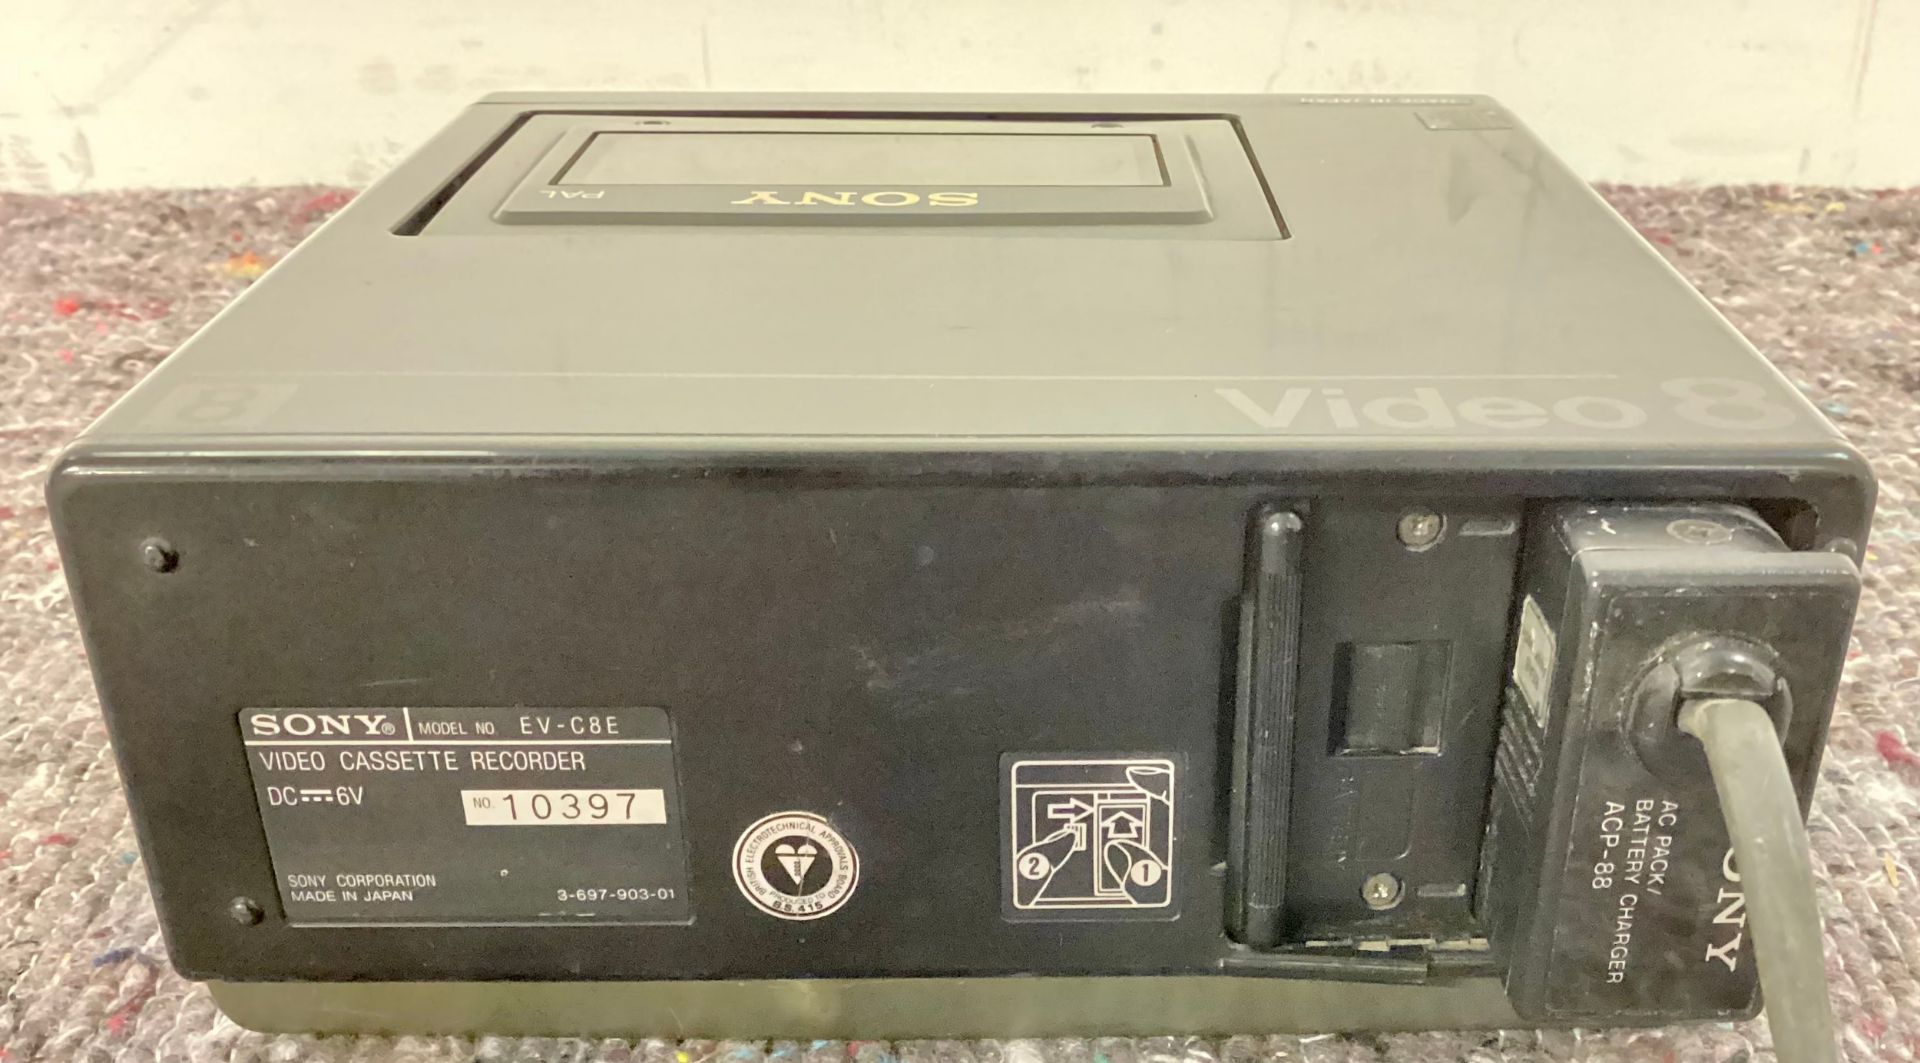 SONY VIDEO 8 TAPE PLAYER. This unit powers up when plugged in and is model No. EV-C8E. - Image 3 of 3